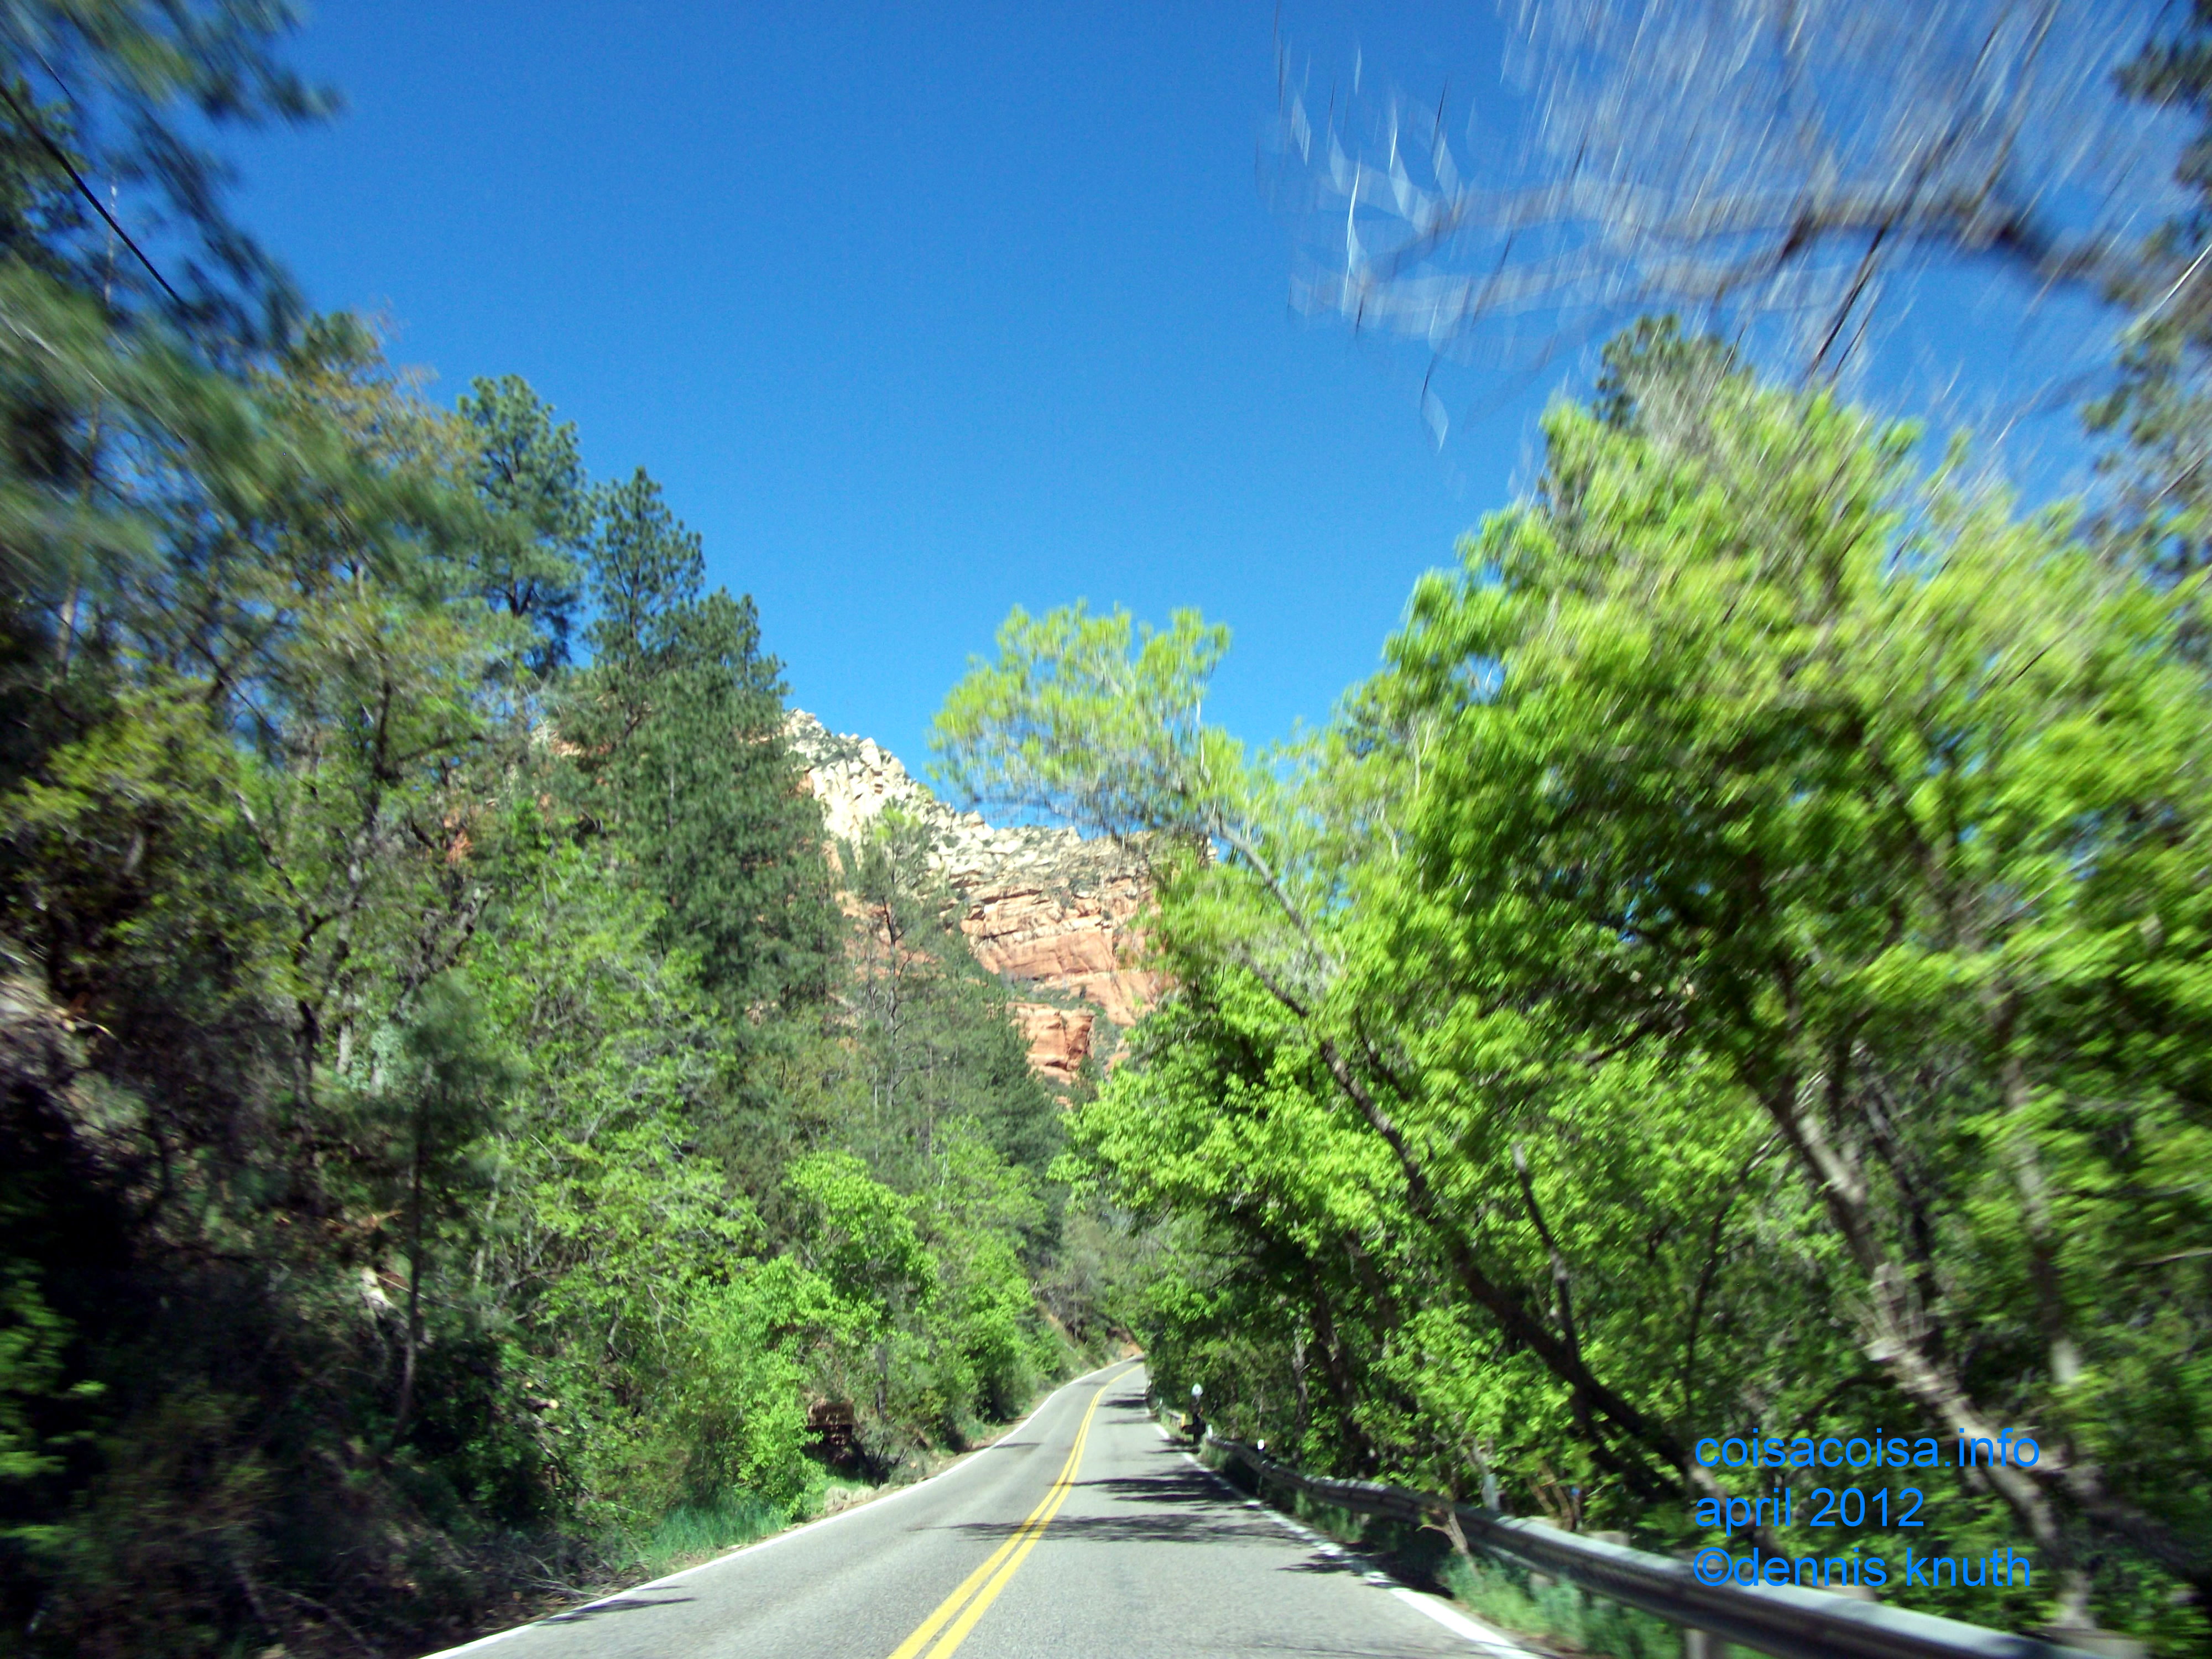 Canyon trees close in on the road